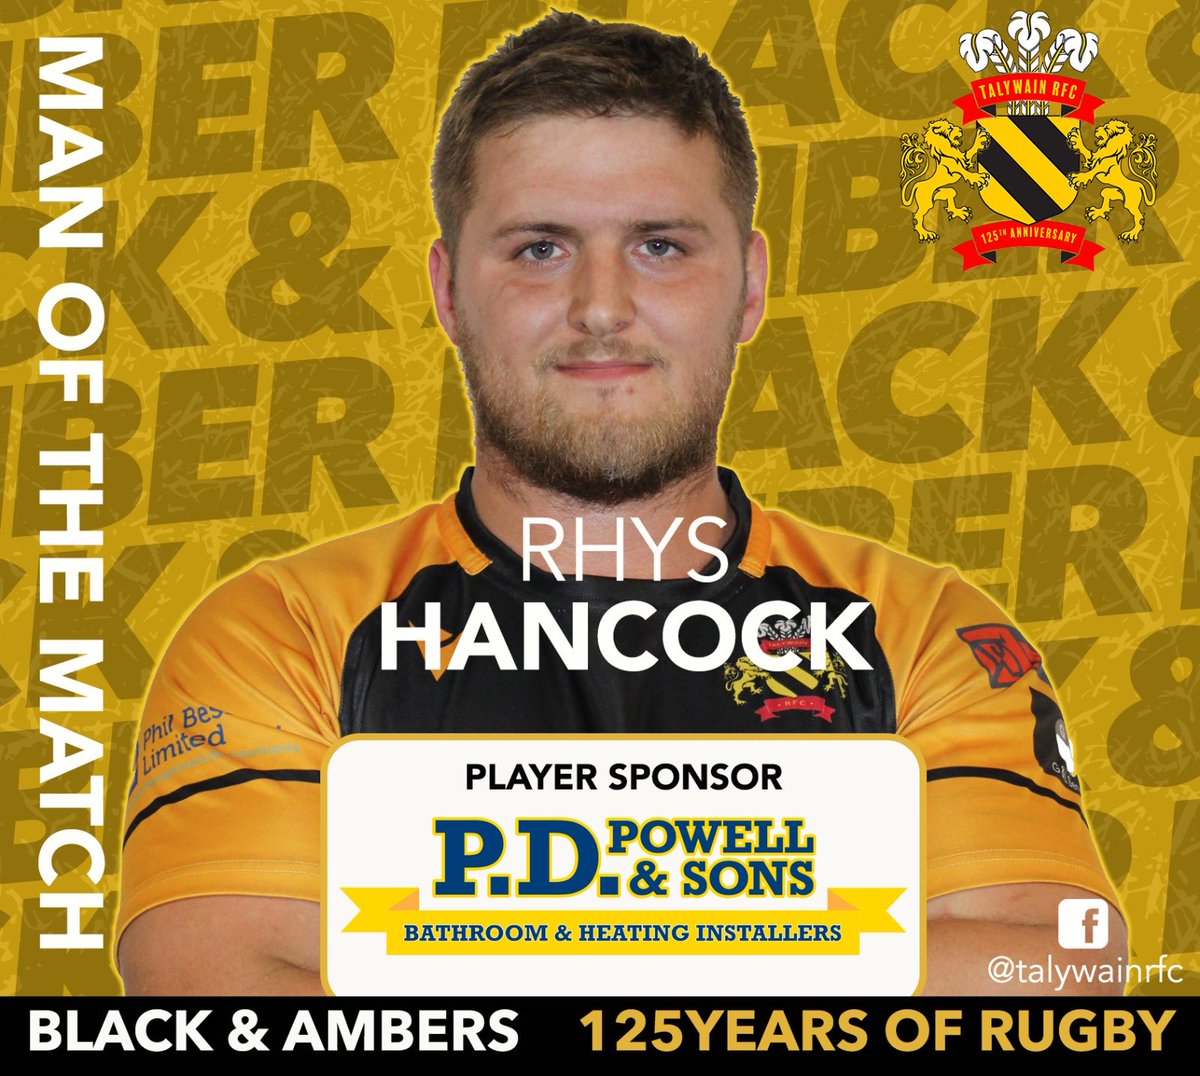 Week in week out the players perform and make this decision difficult, this week Rhys Hancock picks up the award with an outstanding performance. Well done Rhys 🖤💛🖤💛